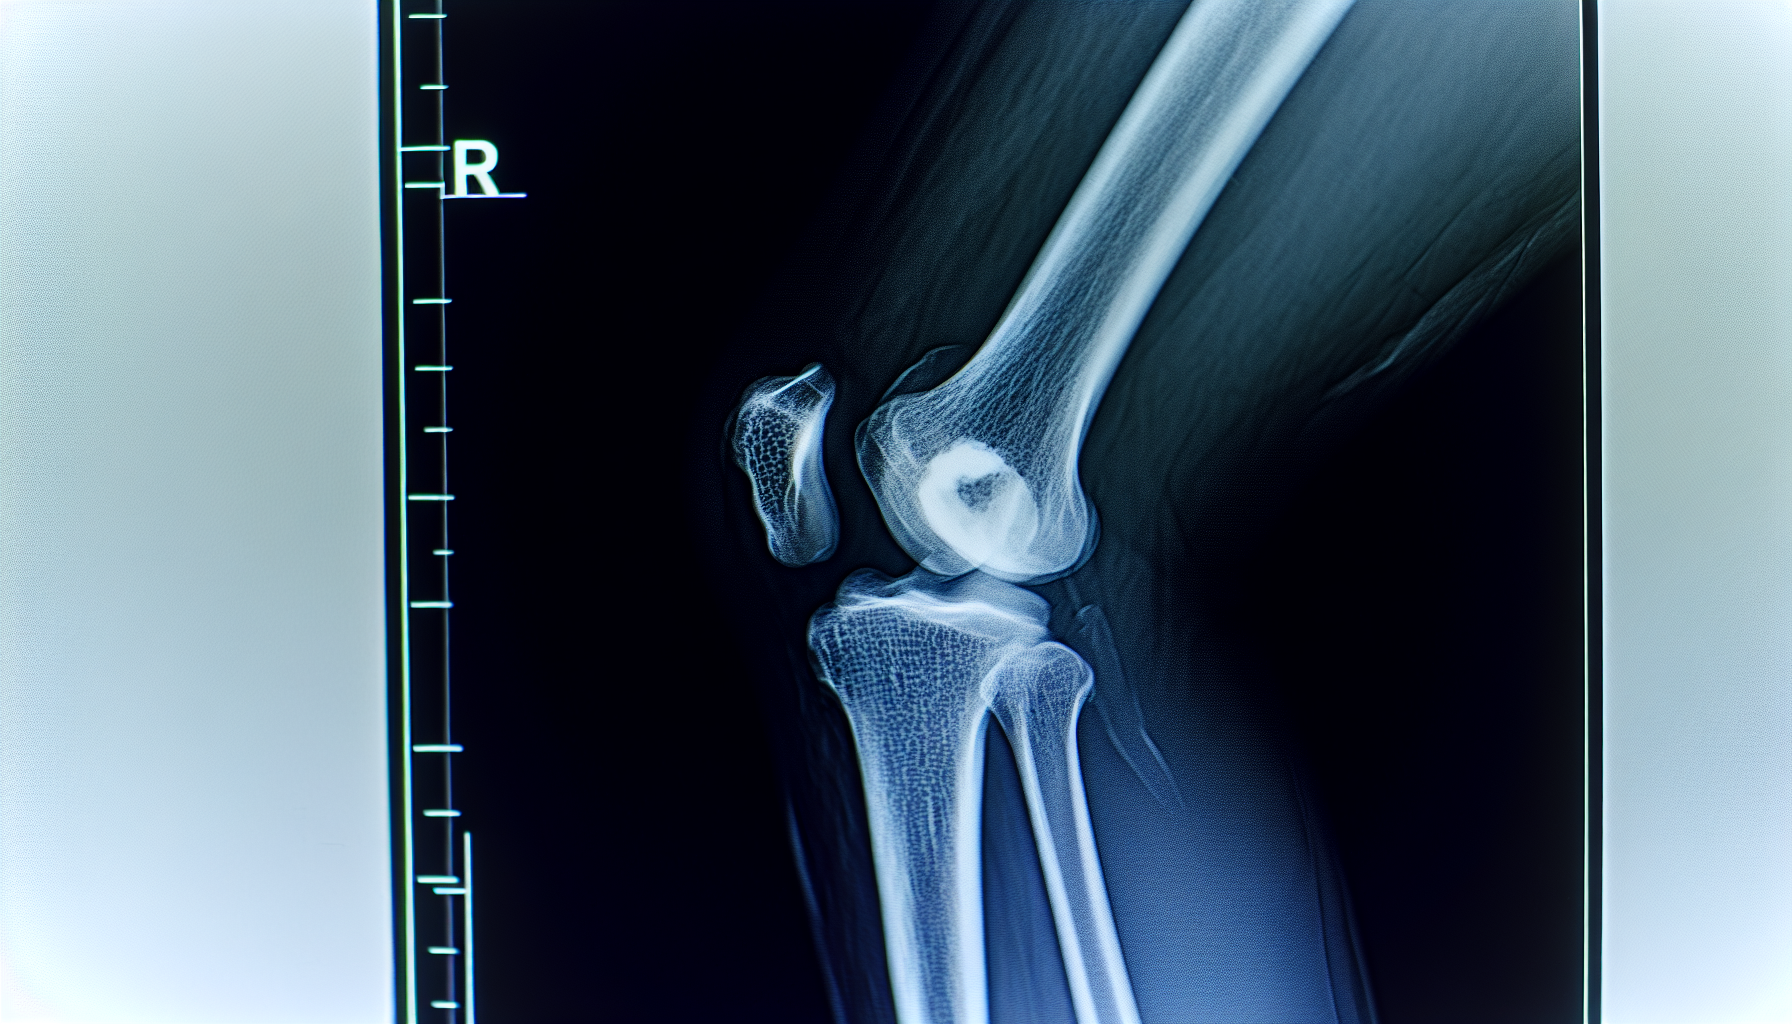 Photo of an X-ray image of an elbow joint